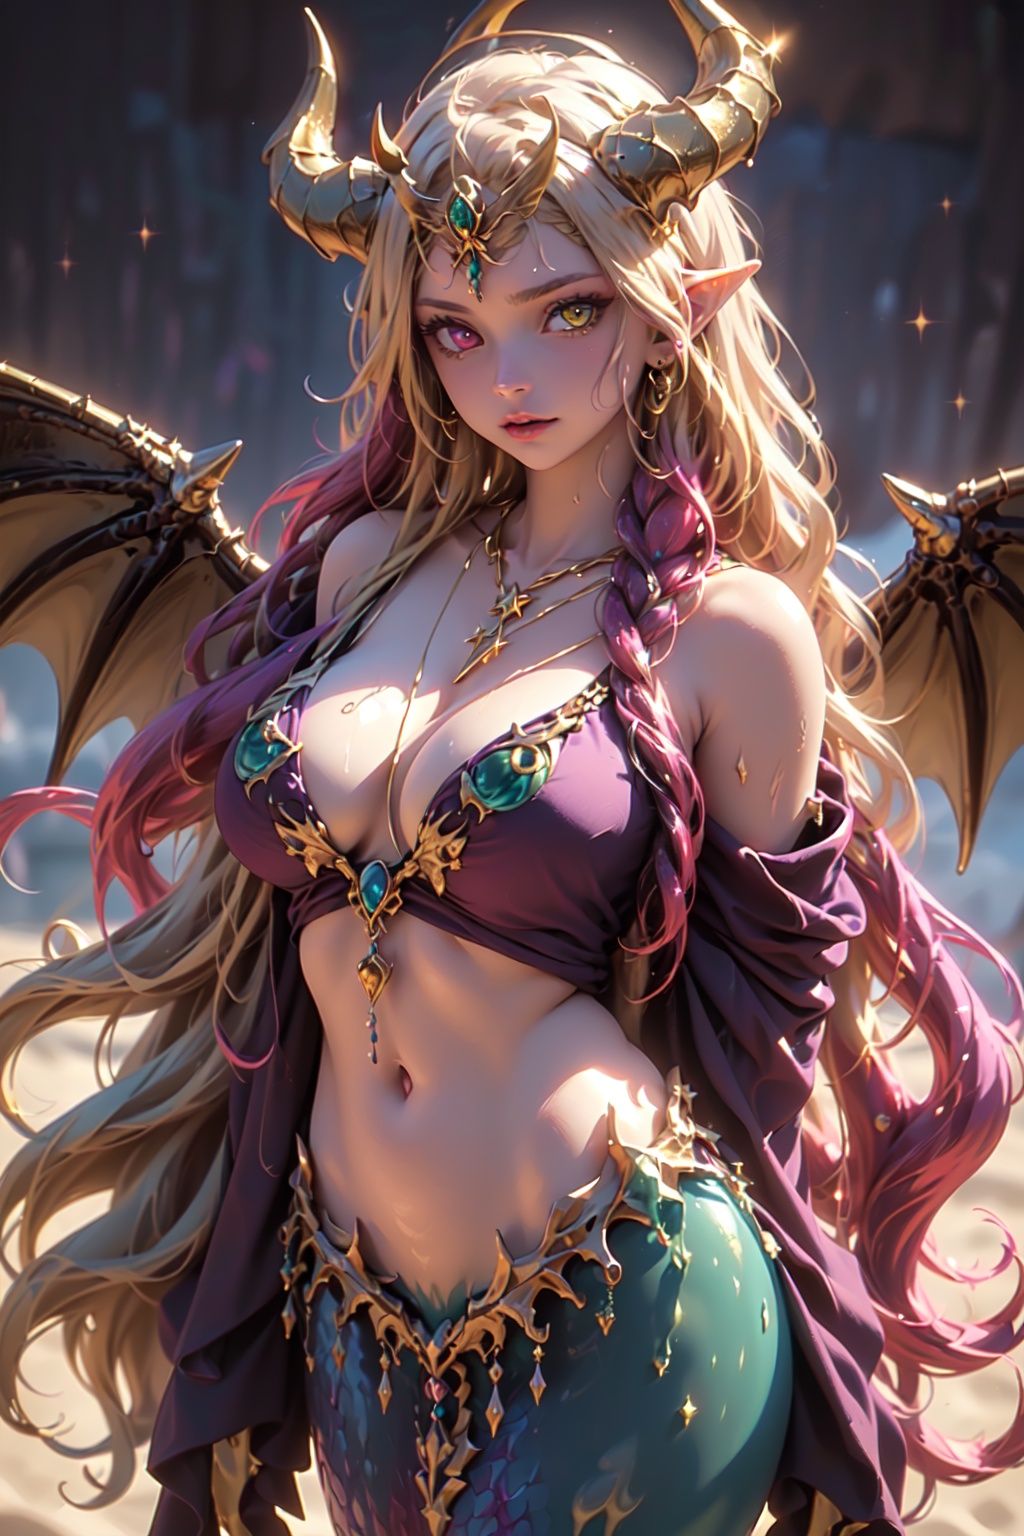 (((elf,purple and gold star slime girl))),((((multicolored_hair,blond and purple hair,long hair,slime hair)))),(((heterochromia,purple and yellow eyes))),(jewel_like eyes),detailed eyes, detailed face ,g_cup size breast,(((holy halo,four wings,star wings))),((purple and gold slime tentacle))),(((big horns,gold horns, purple horns,four horns))),(((a lot of jewel,galactic tiara,star shaped necklace))),((gold and purple bikini)),(((dragon mermaid tail))),((beach,noon)),